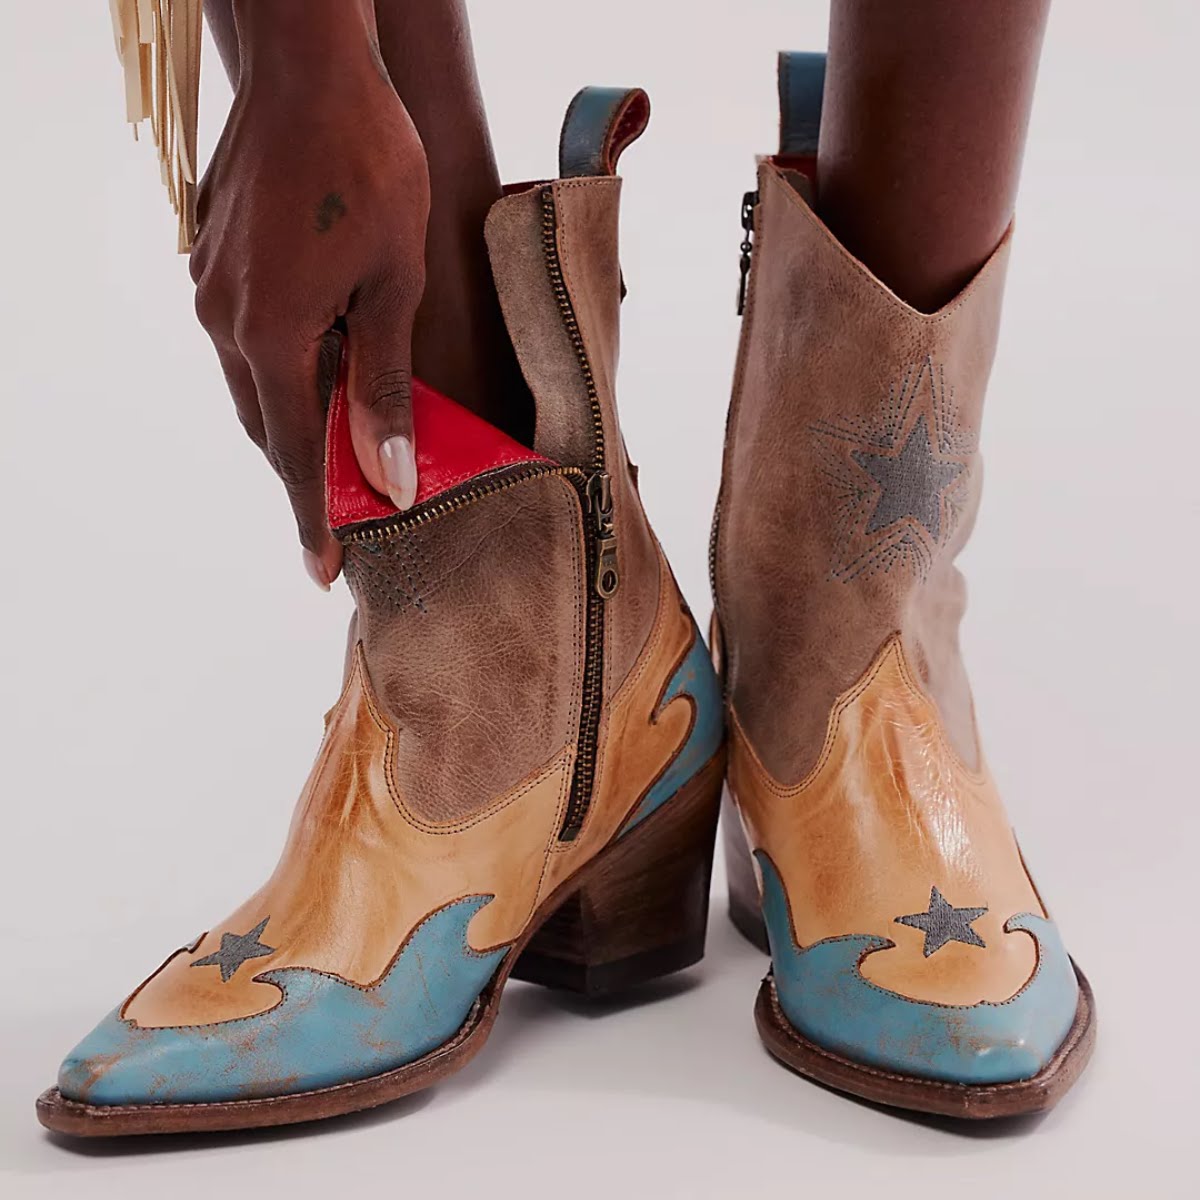 Stardom Western Boots, €378, Free People